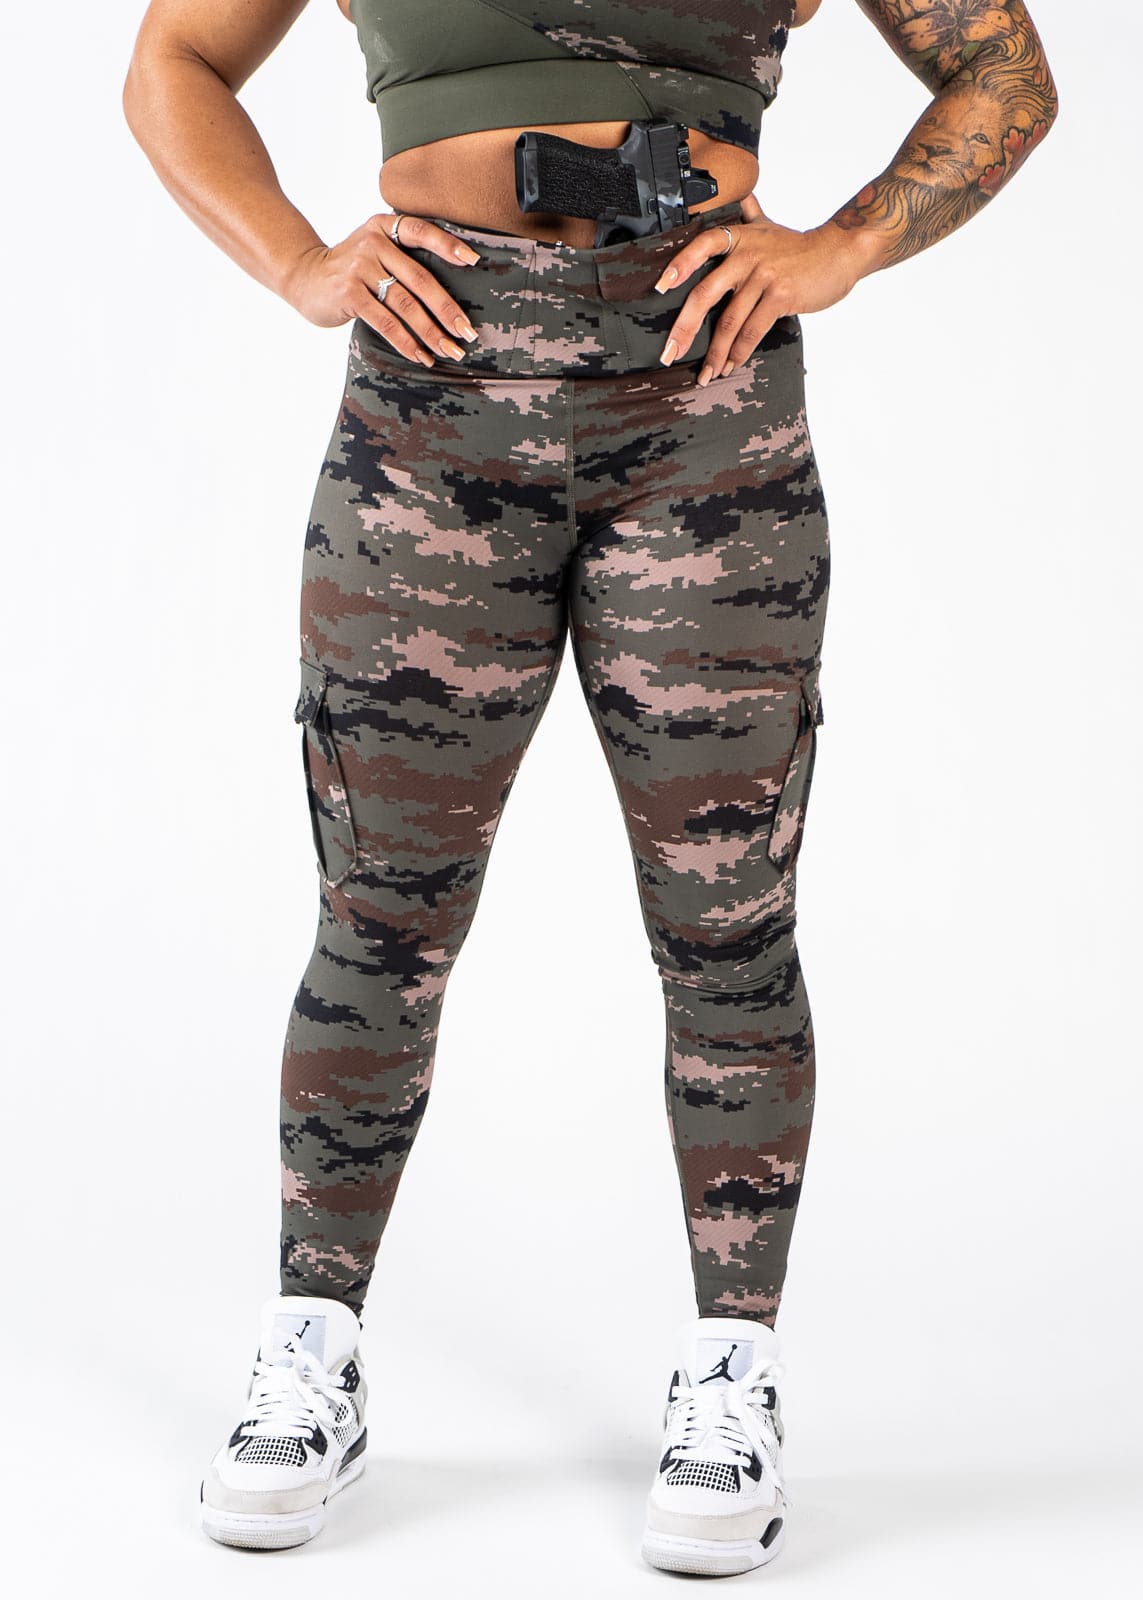 Concealed Carry Leggings Shoulders Down Front View with Hands on Sides | Green Camo